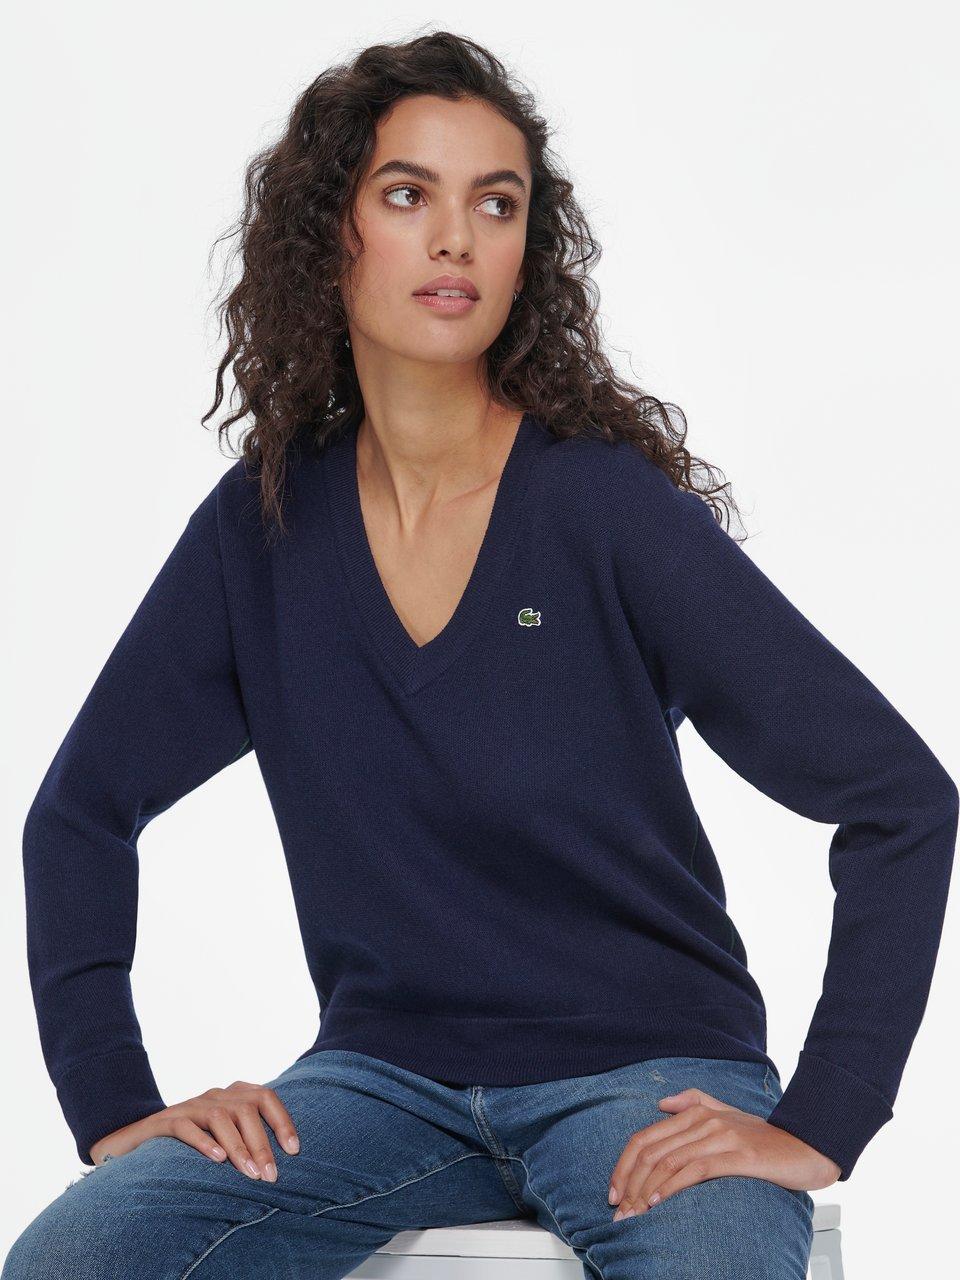 Lacoste - Le pull